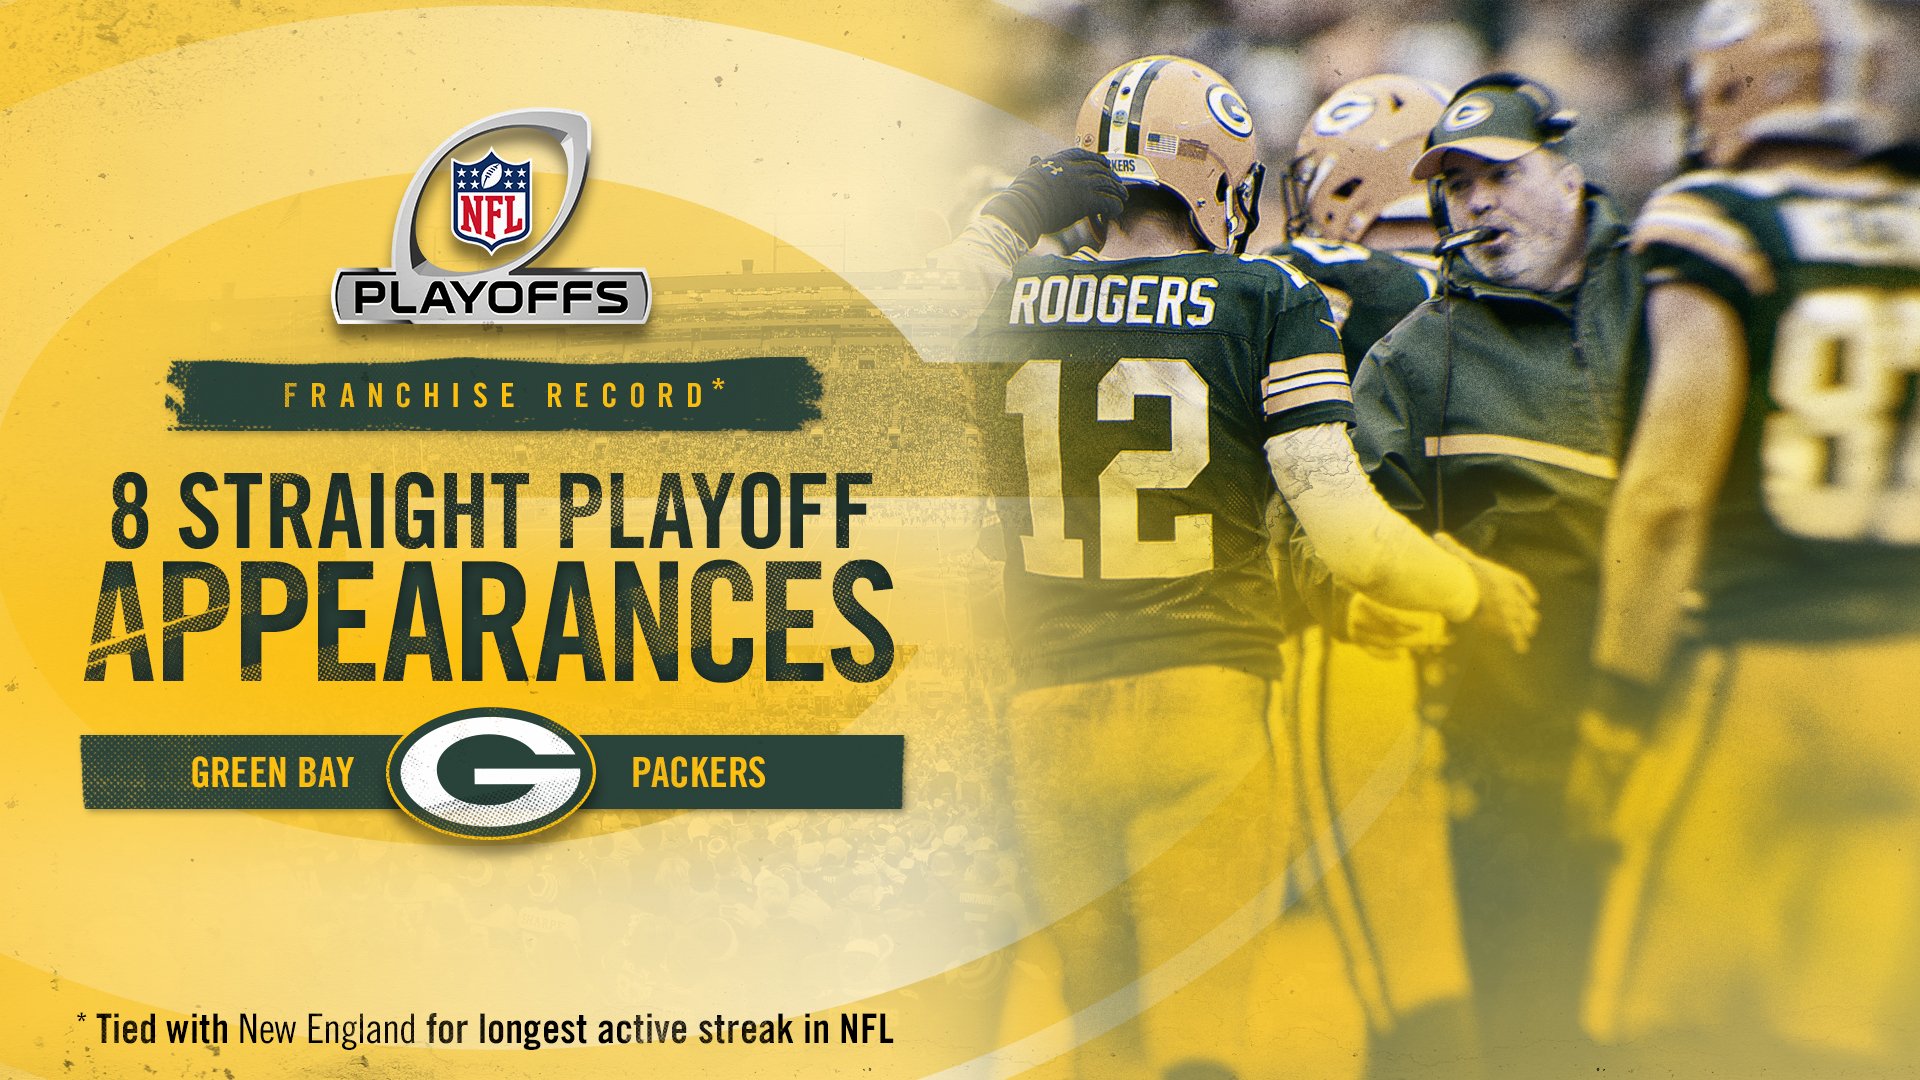 Green Bay Packers on X: The #Packers are playoff bound for the